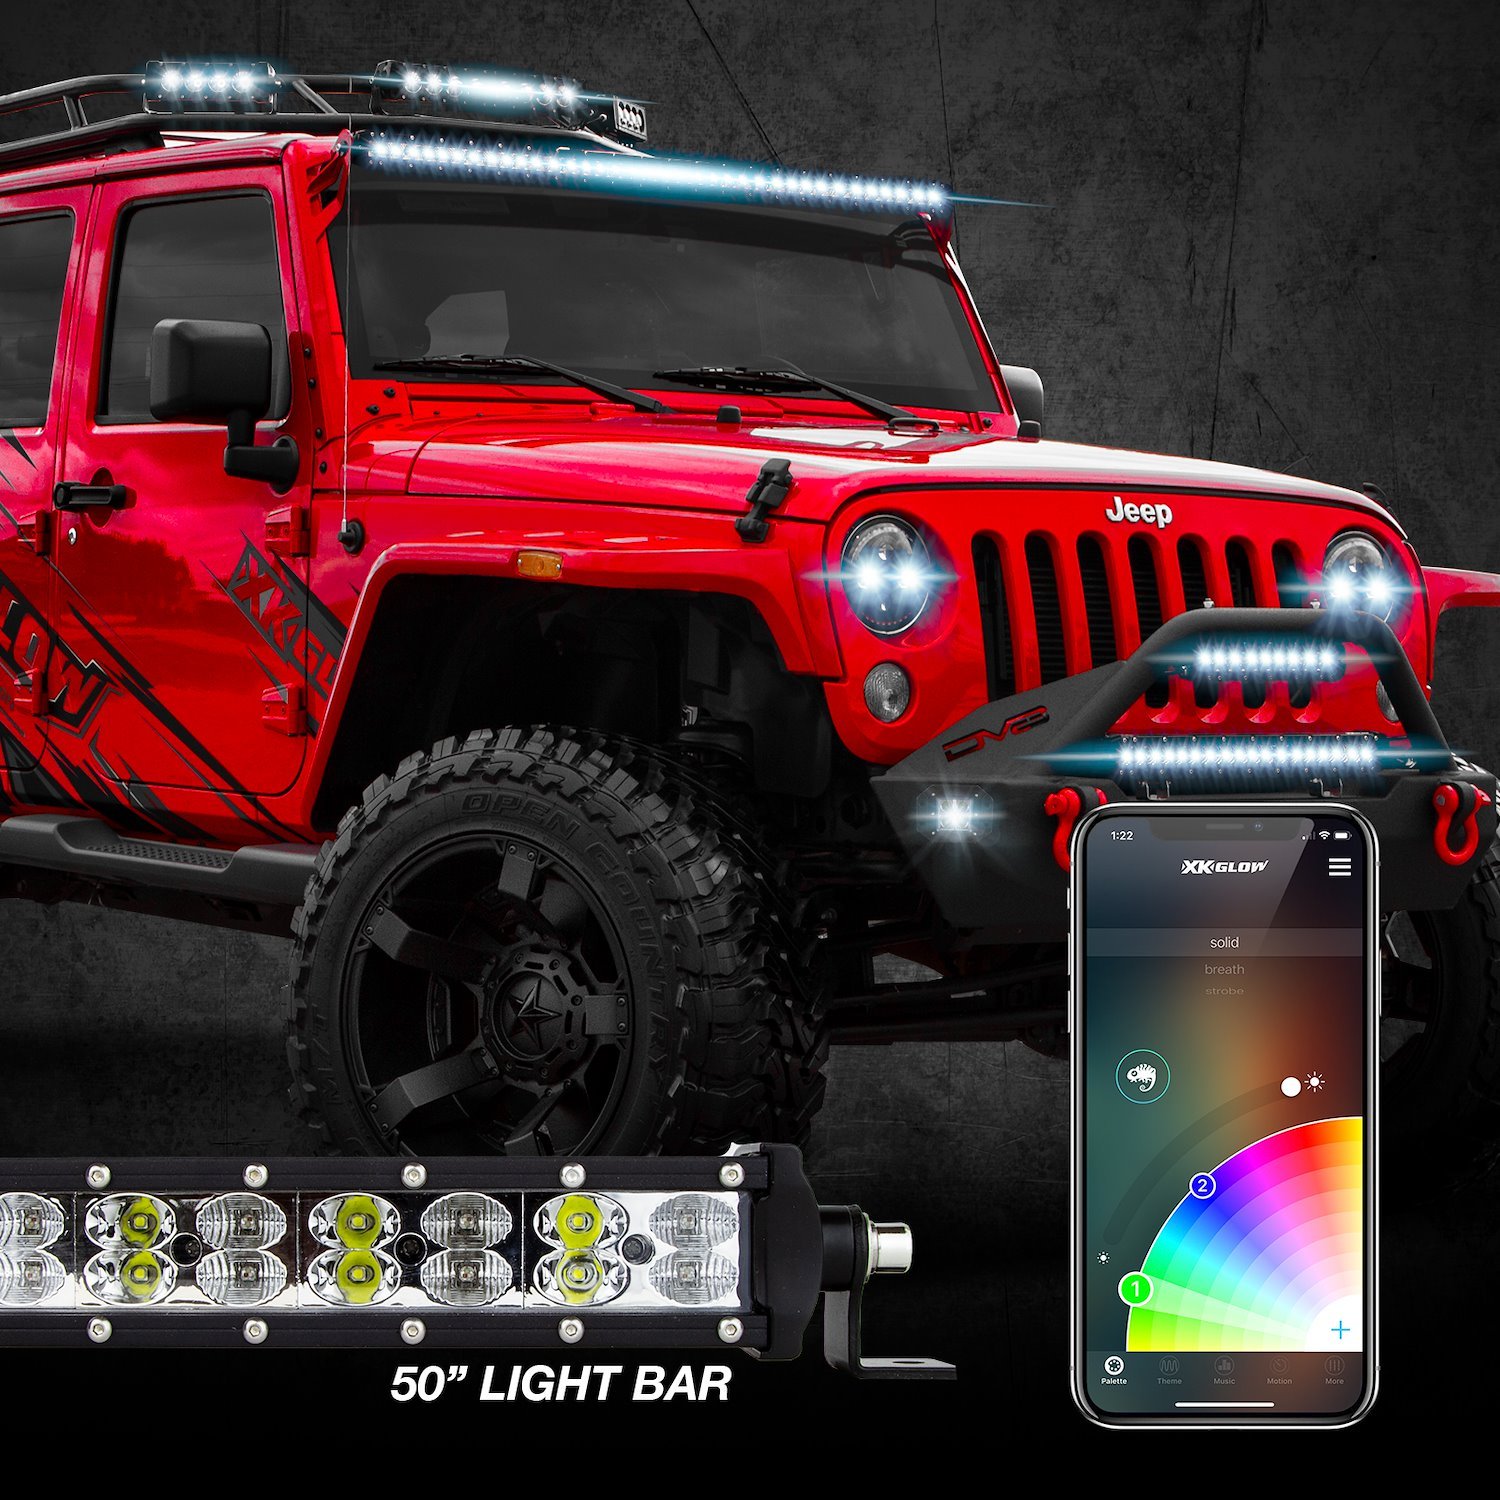 XK-BAR-50 50 in. RGBW Light Bar, High-Power Offroad Work/Hunting Light, w/Built-in XKCHROME Bluetooth Controller, Universal Fit